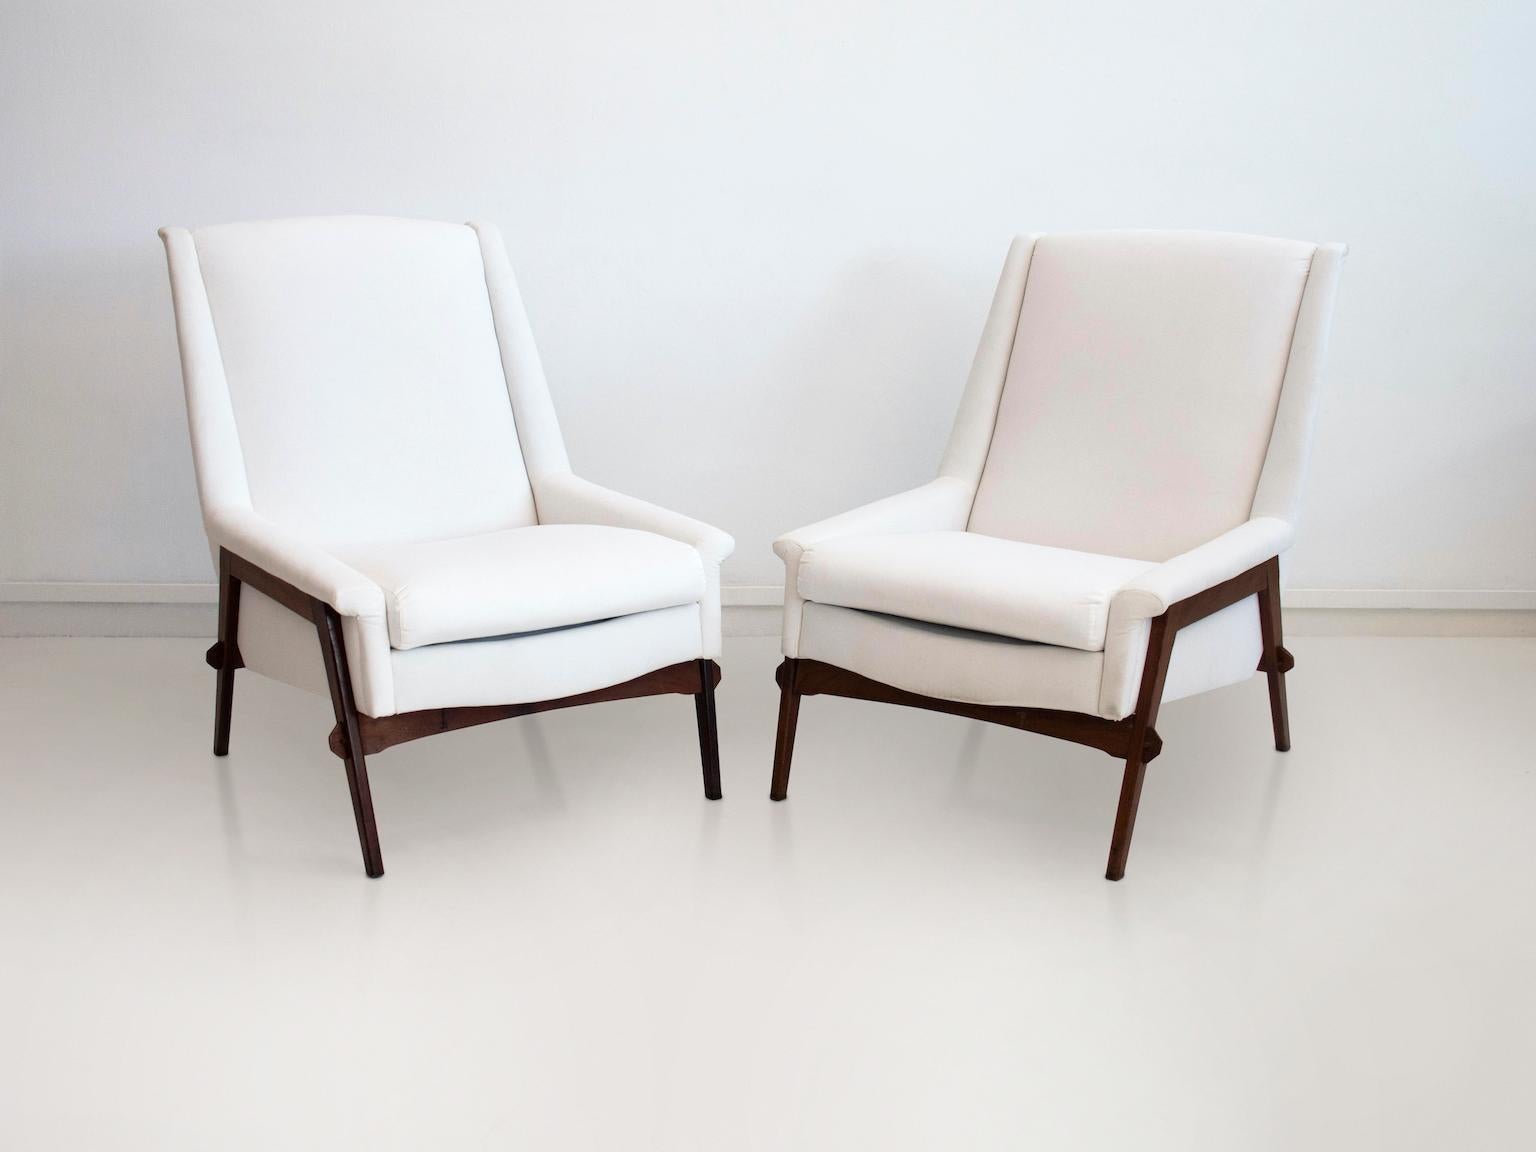 Pair of armchairs, made in Italy, circa 1950s. Structure in stained oakwood, upholstered cushions covered in white fabric. Good vintage condition, minor stains on upholstery.